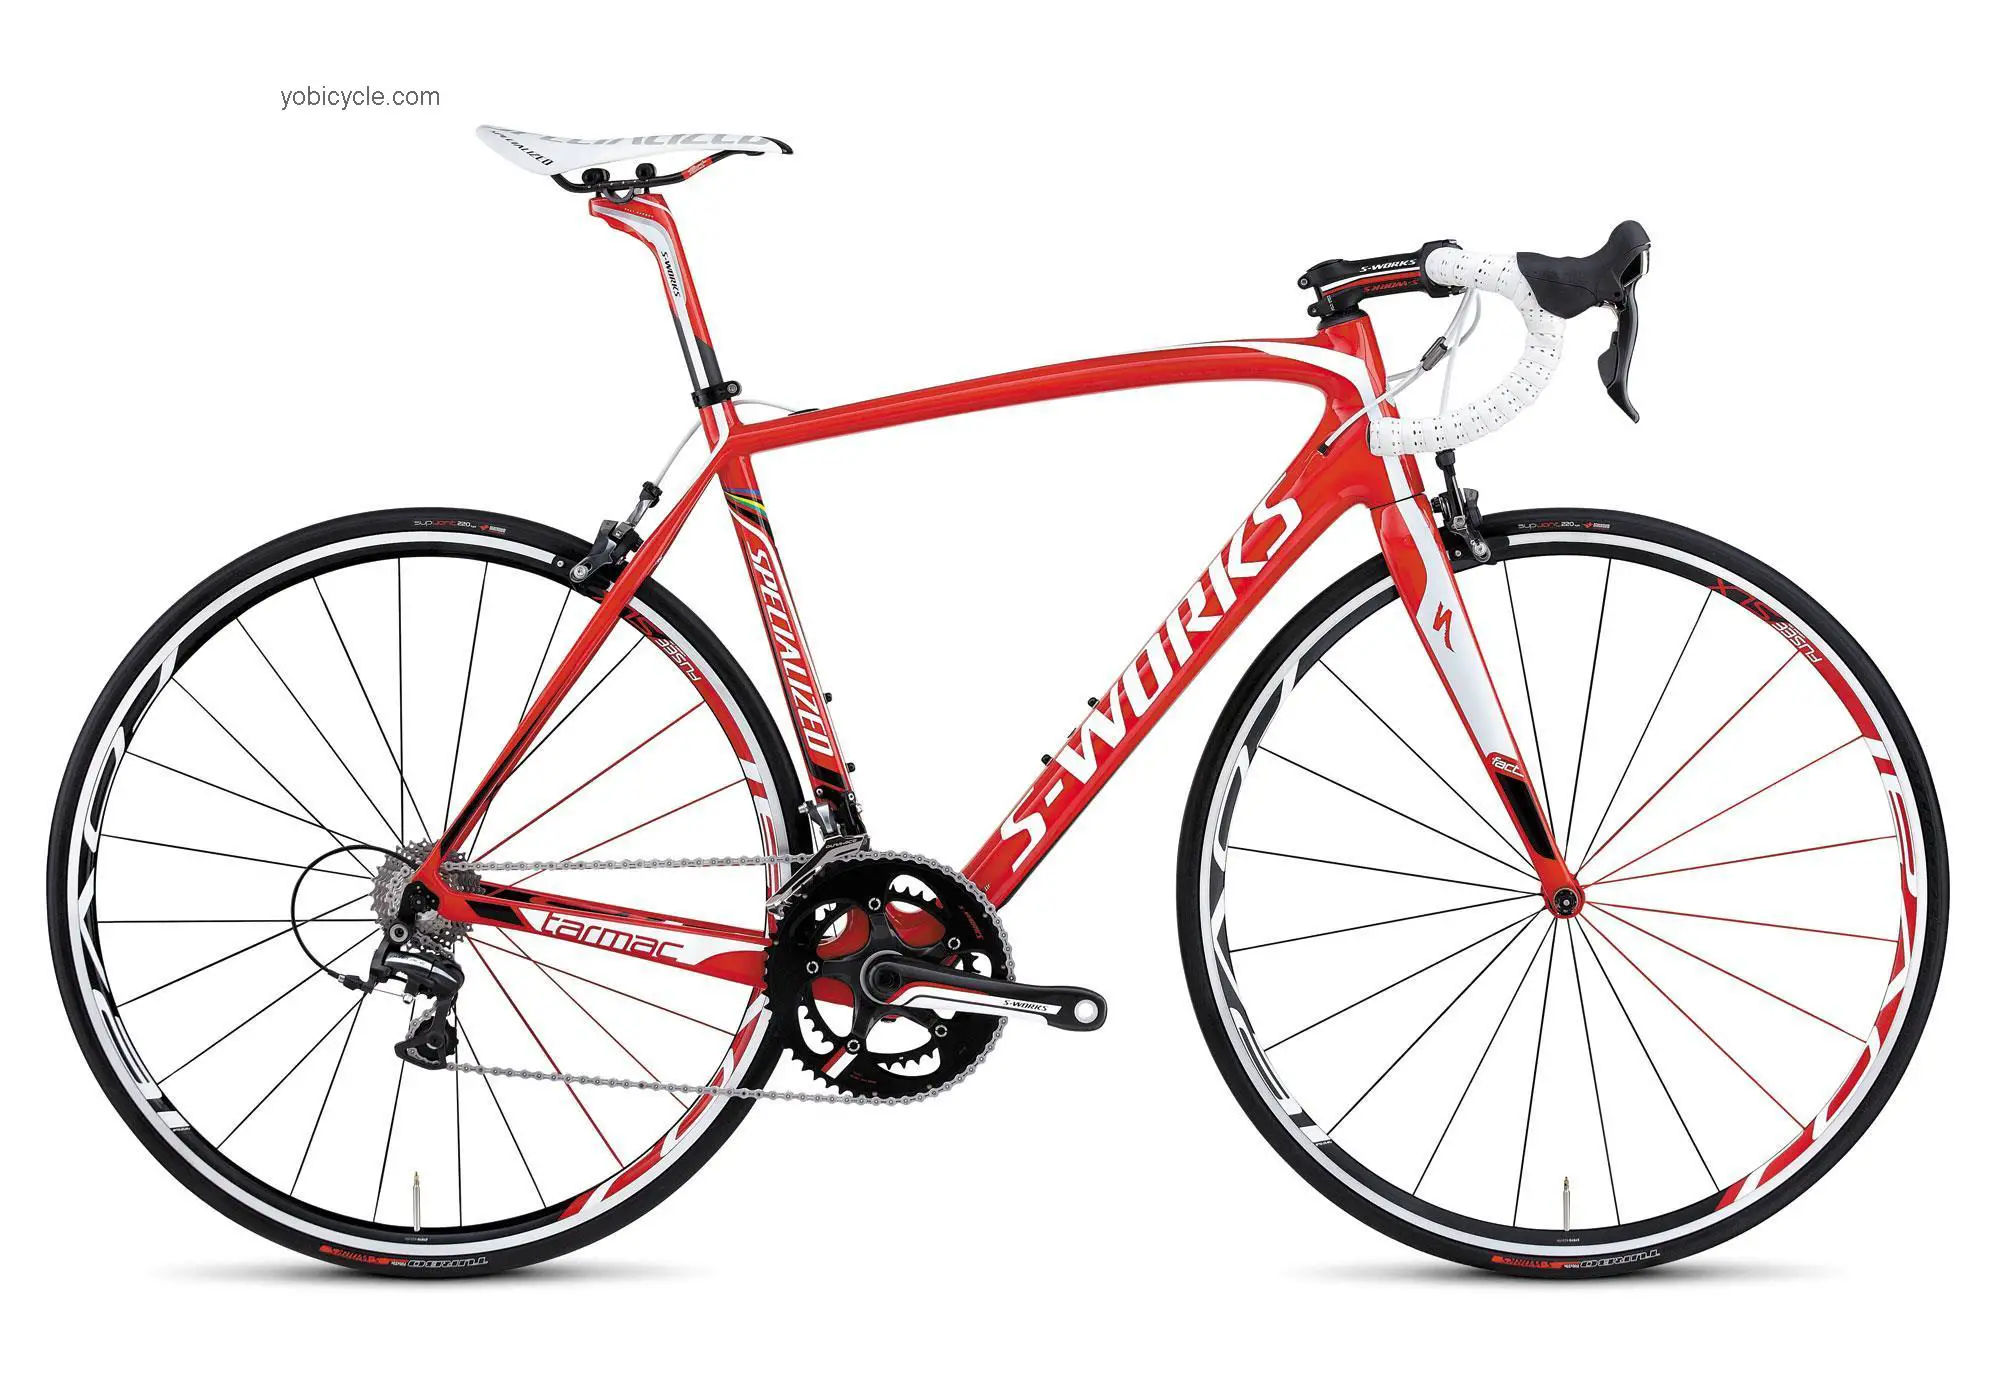 Specialized  S-Works Tarmac SL4 Dura-Ace Technical data and specifications